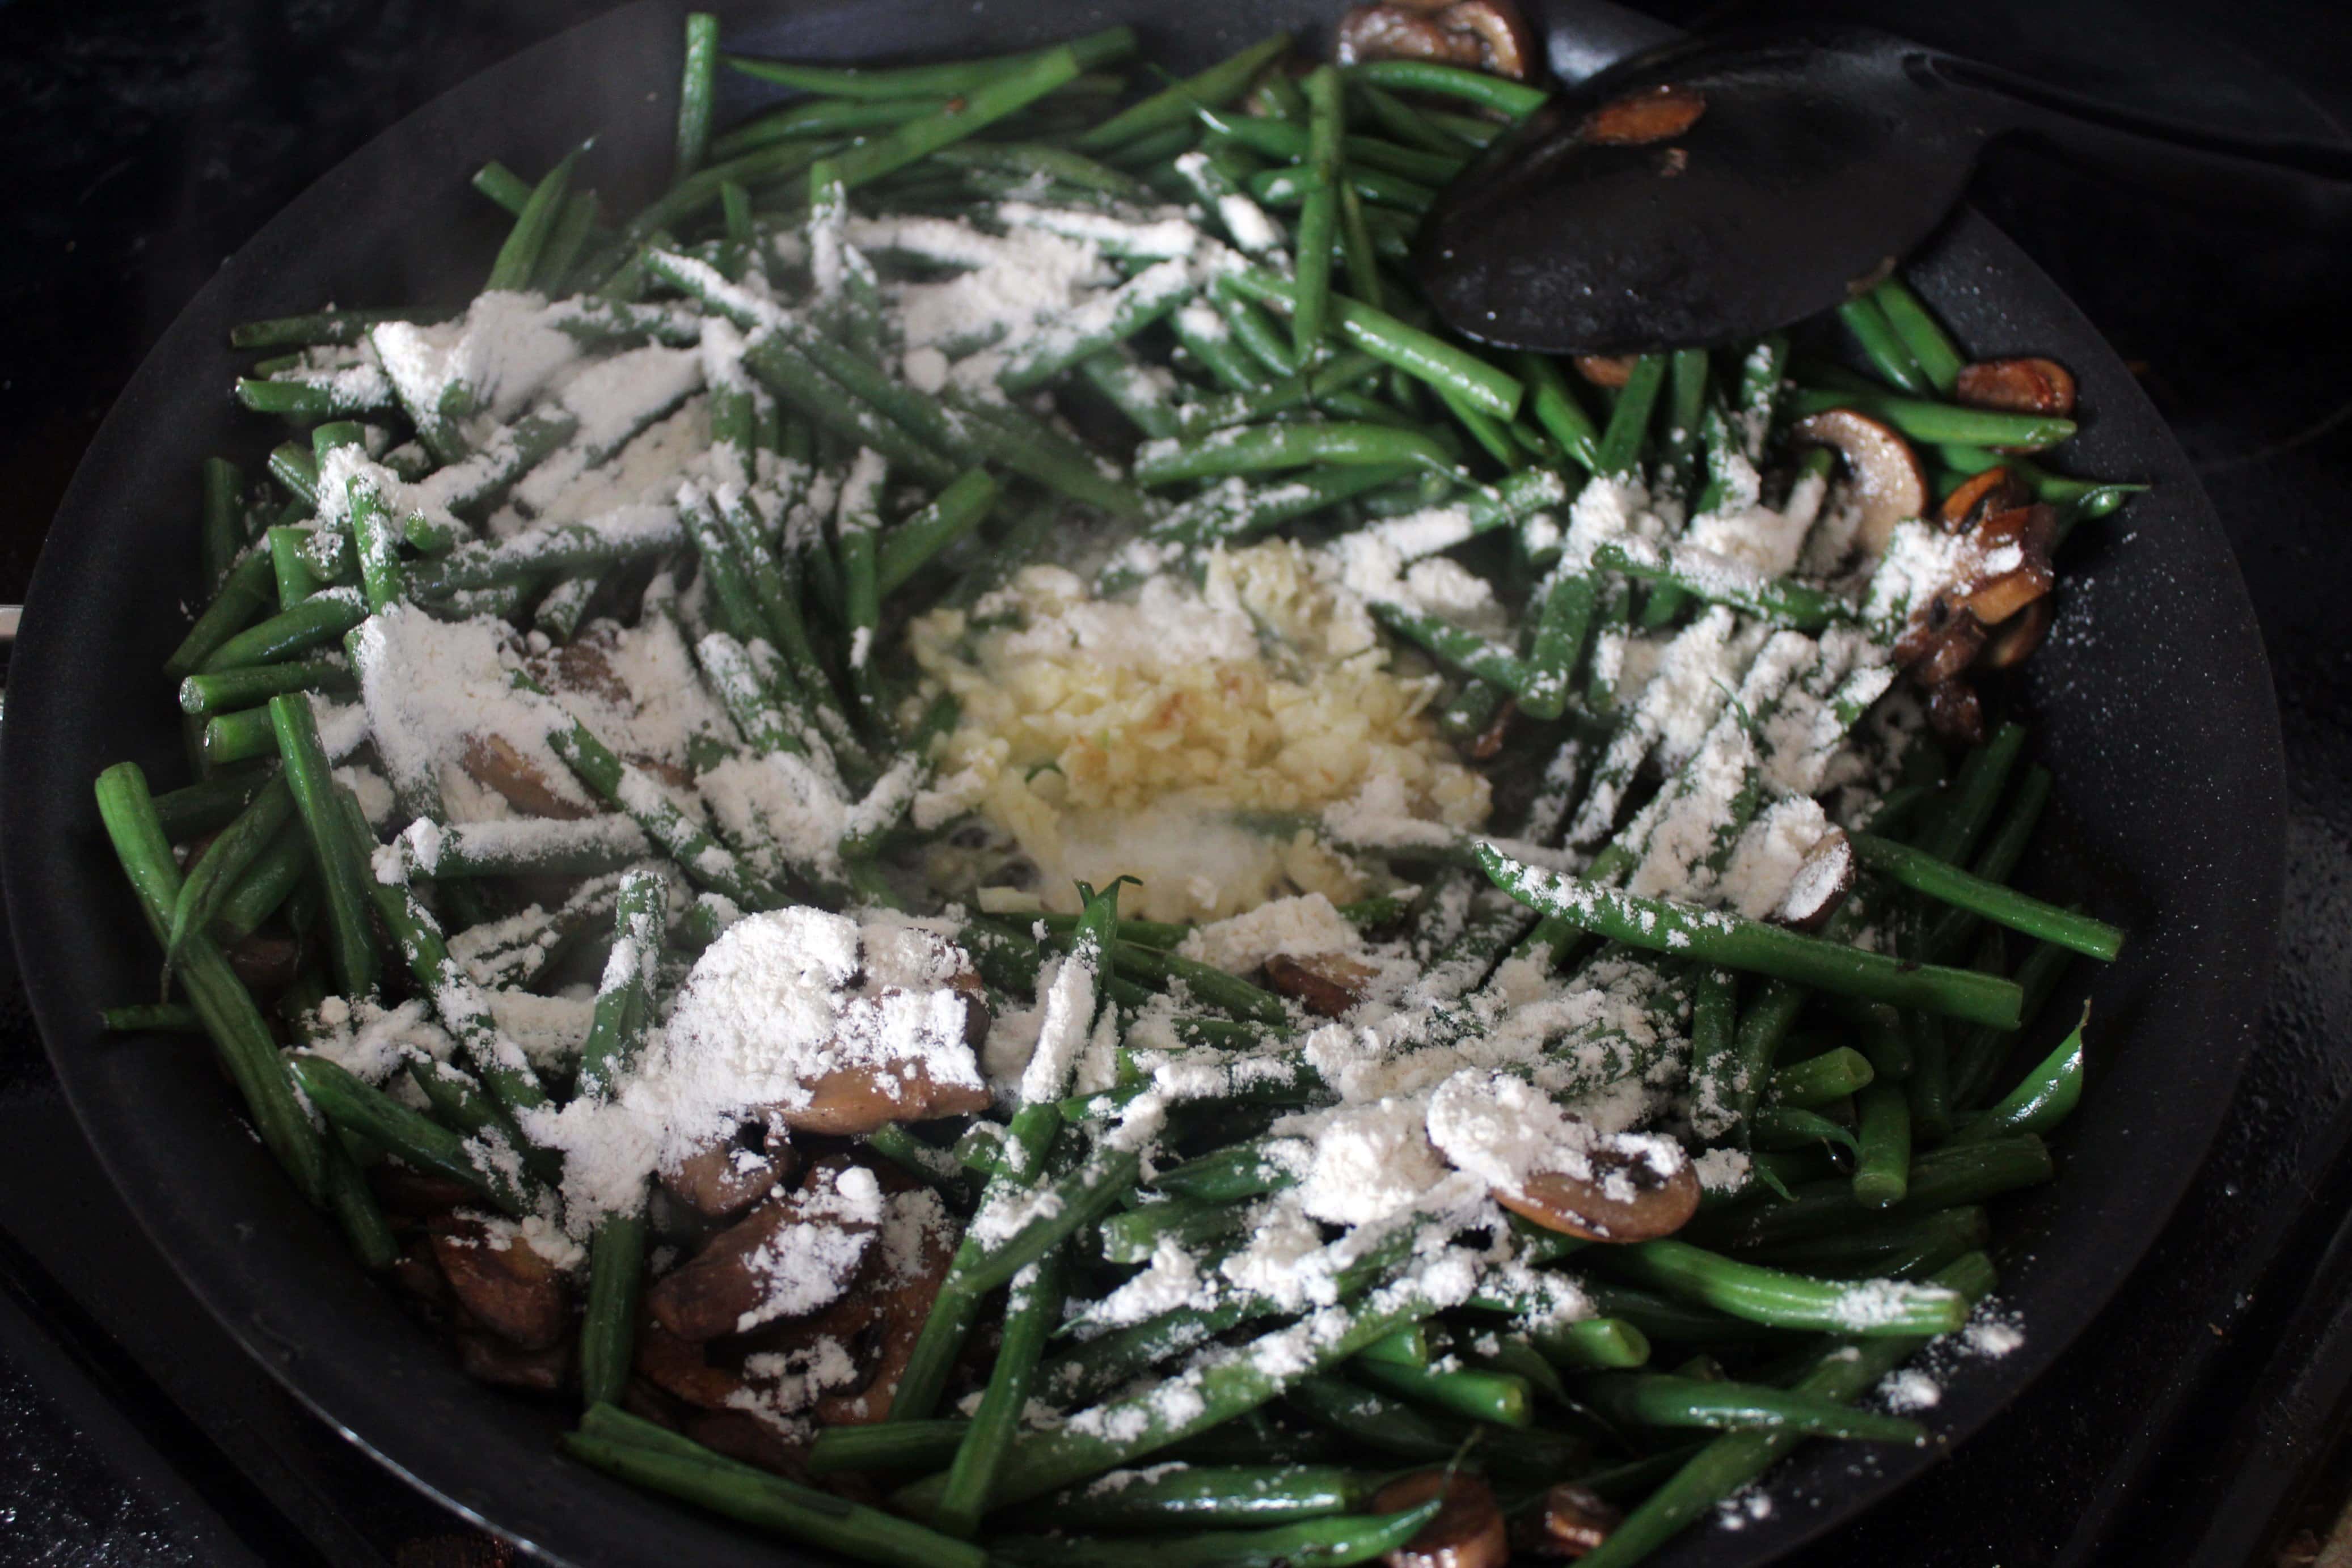 flour sprinkled over green beans and mushrooms as a roux.